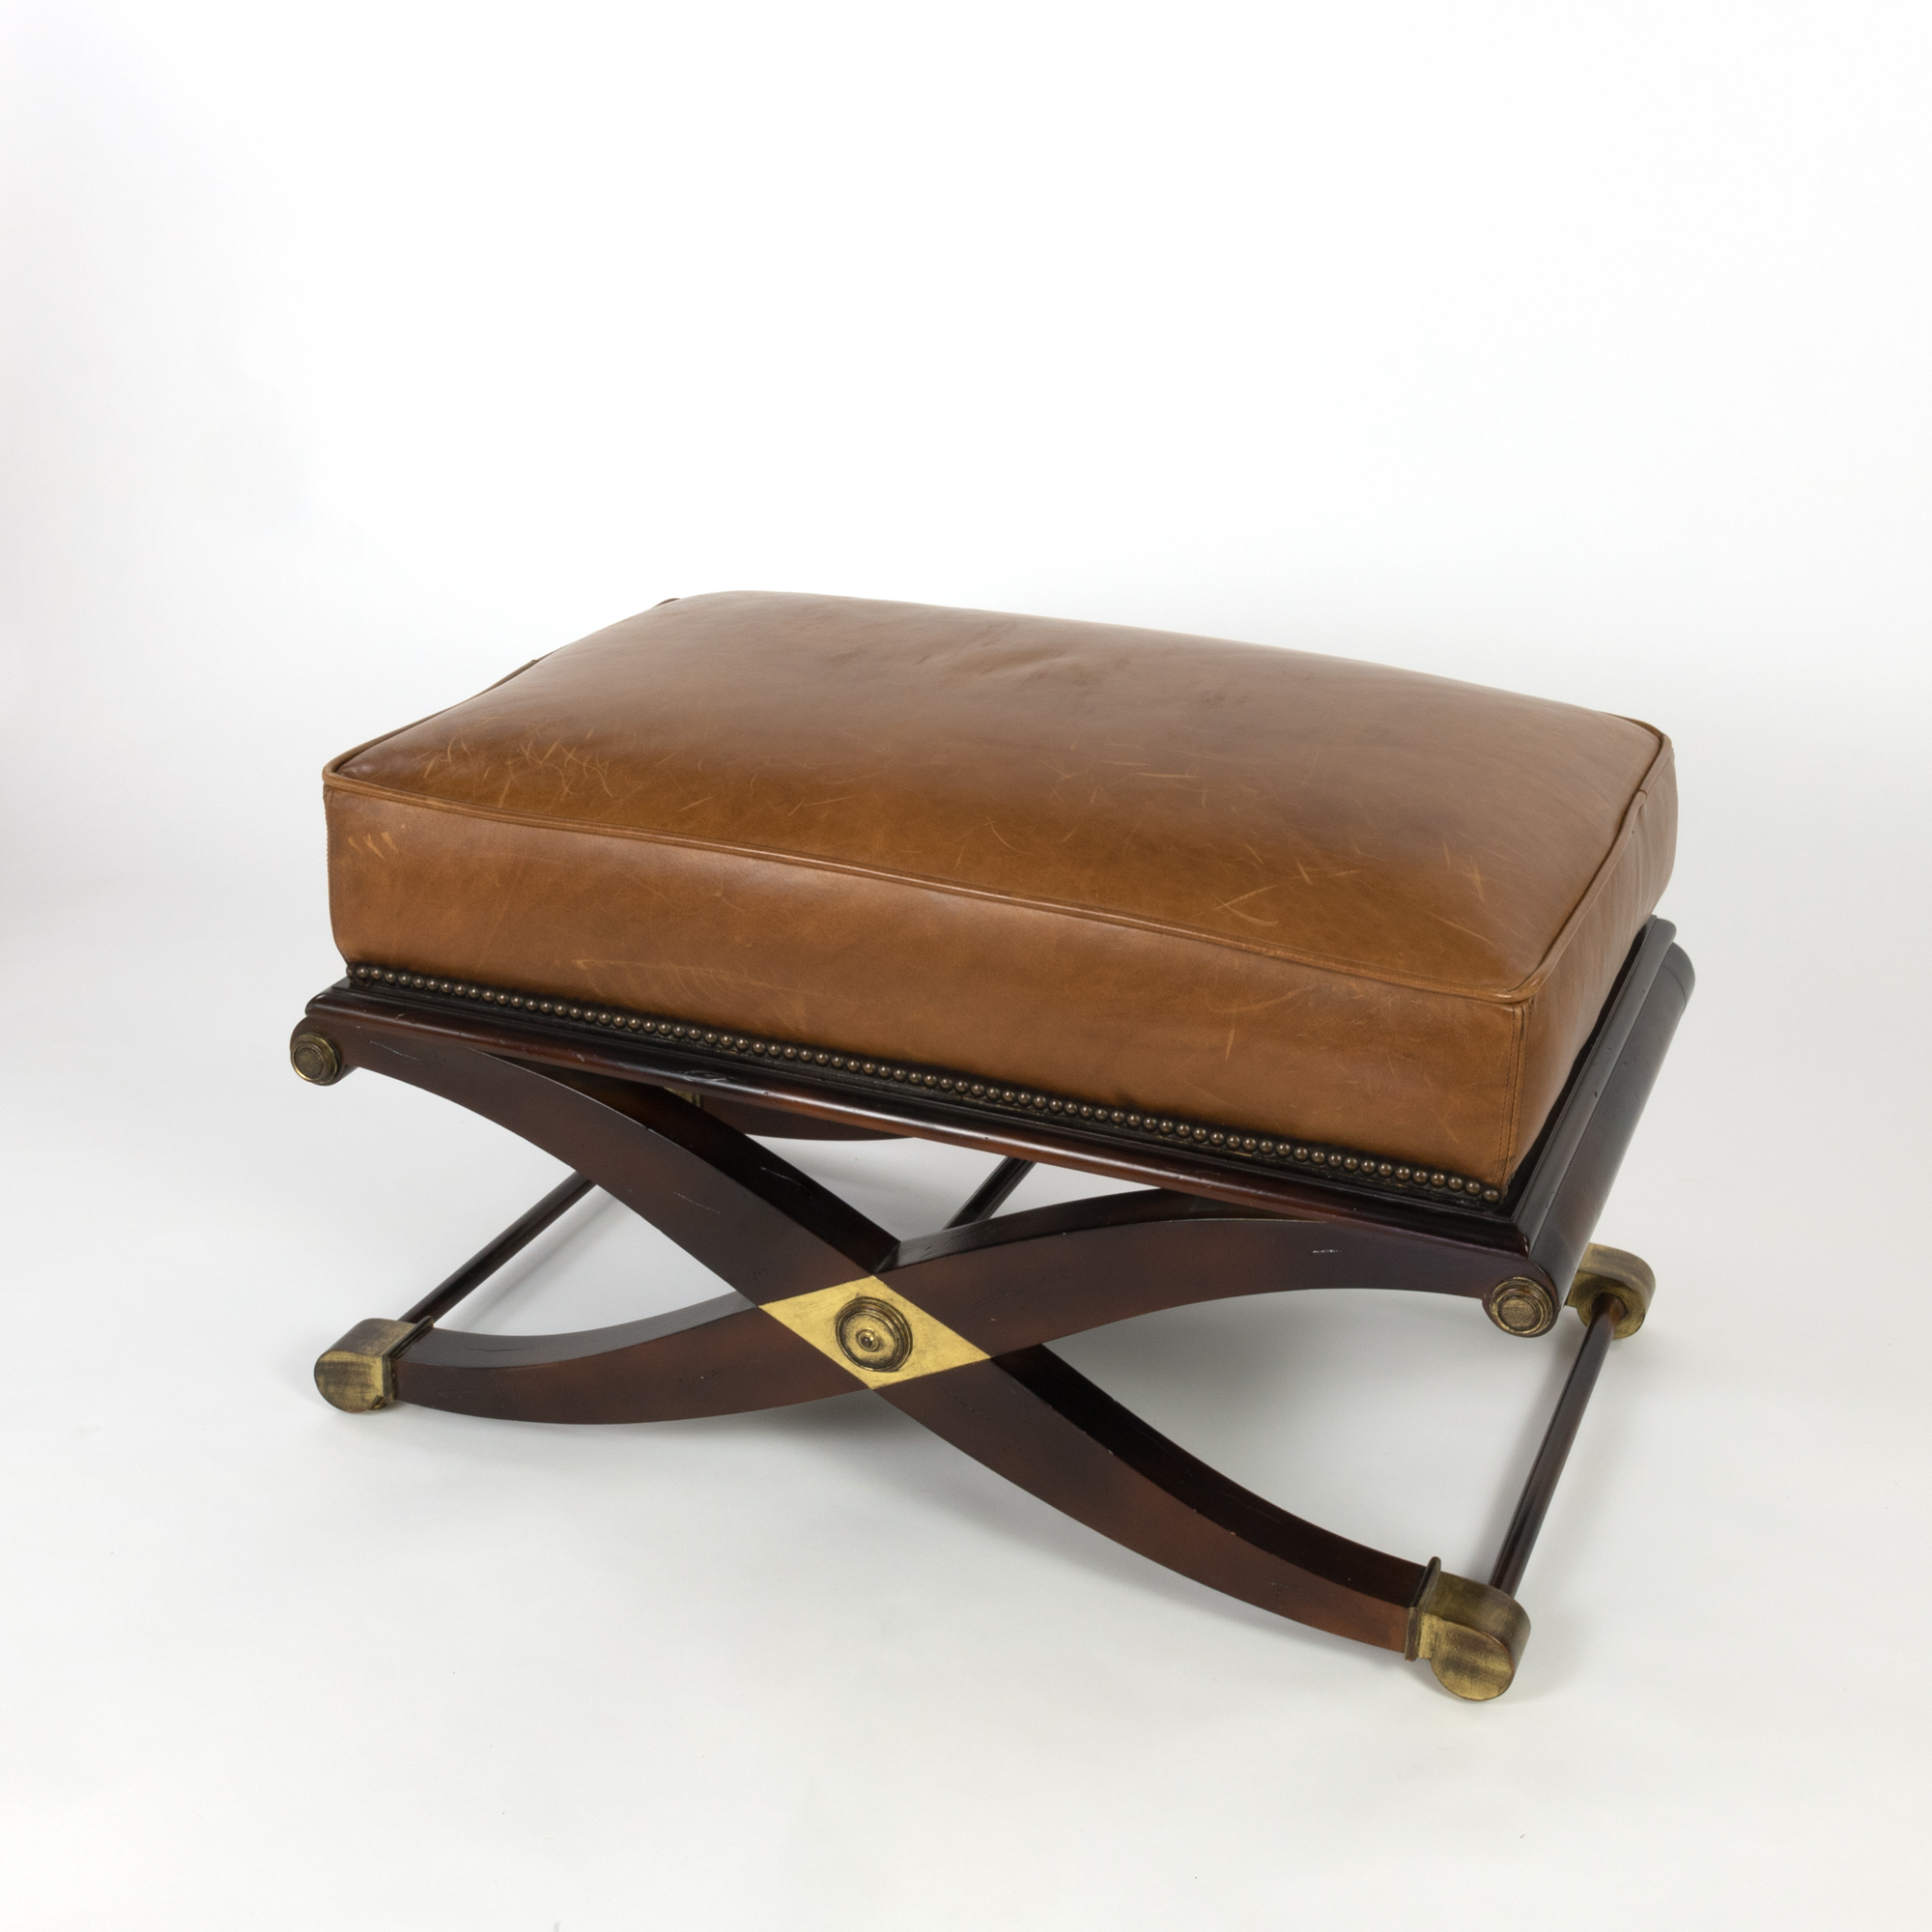 Late 20th Century English Ebonized and Upholstered Footstool with